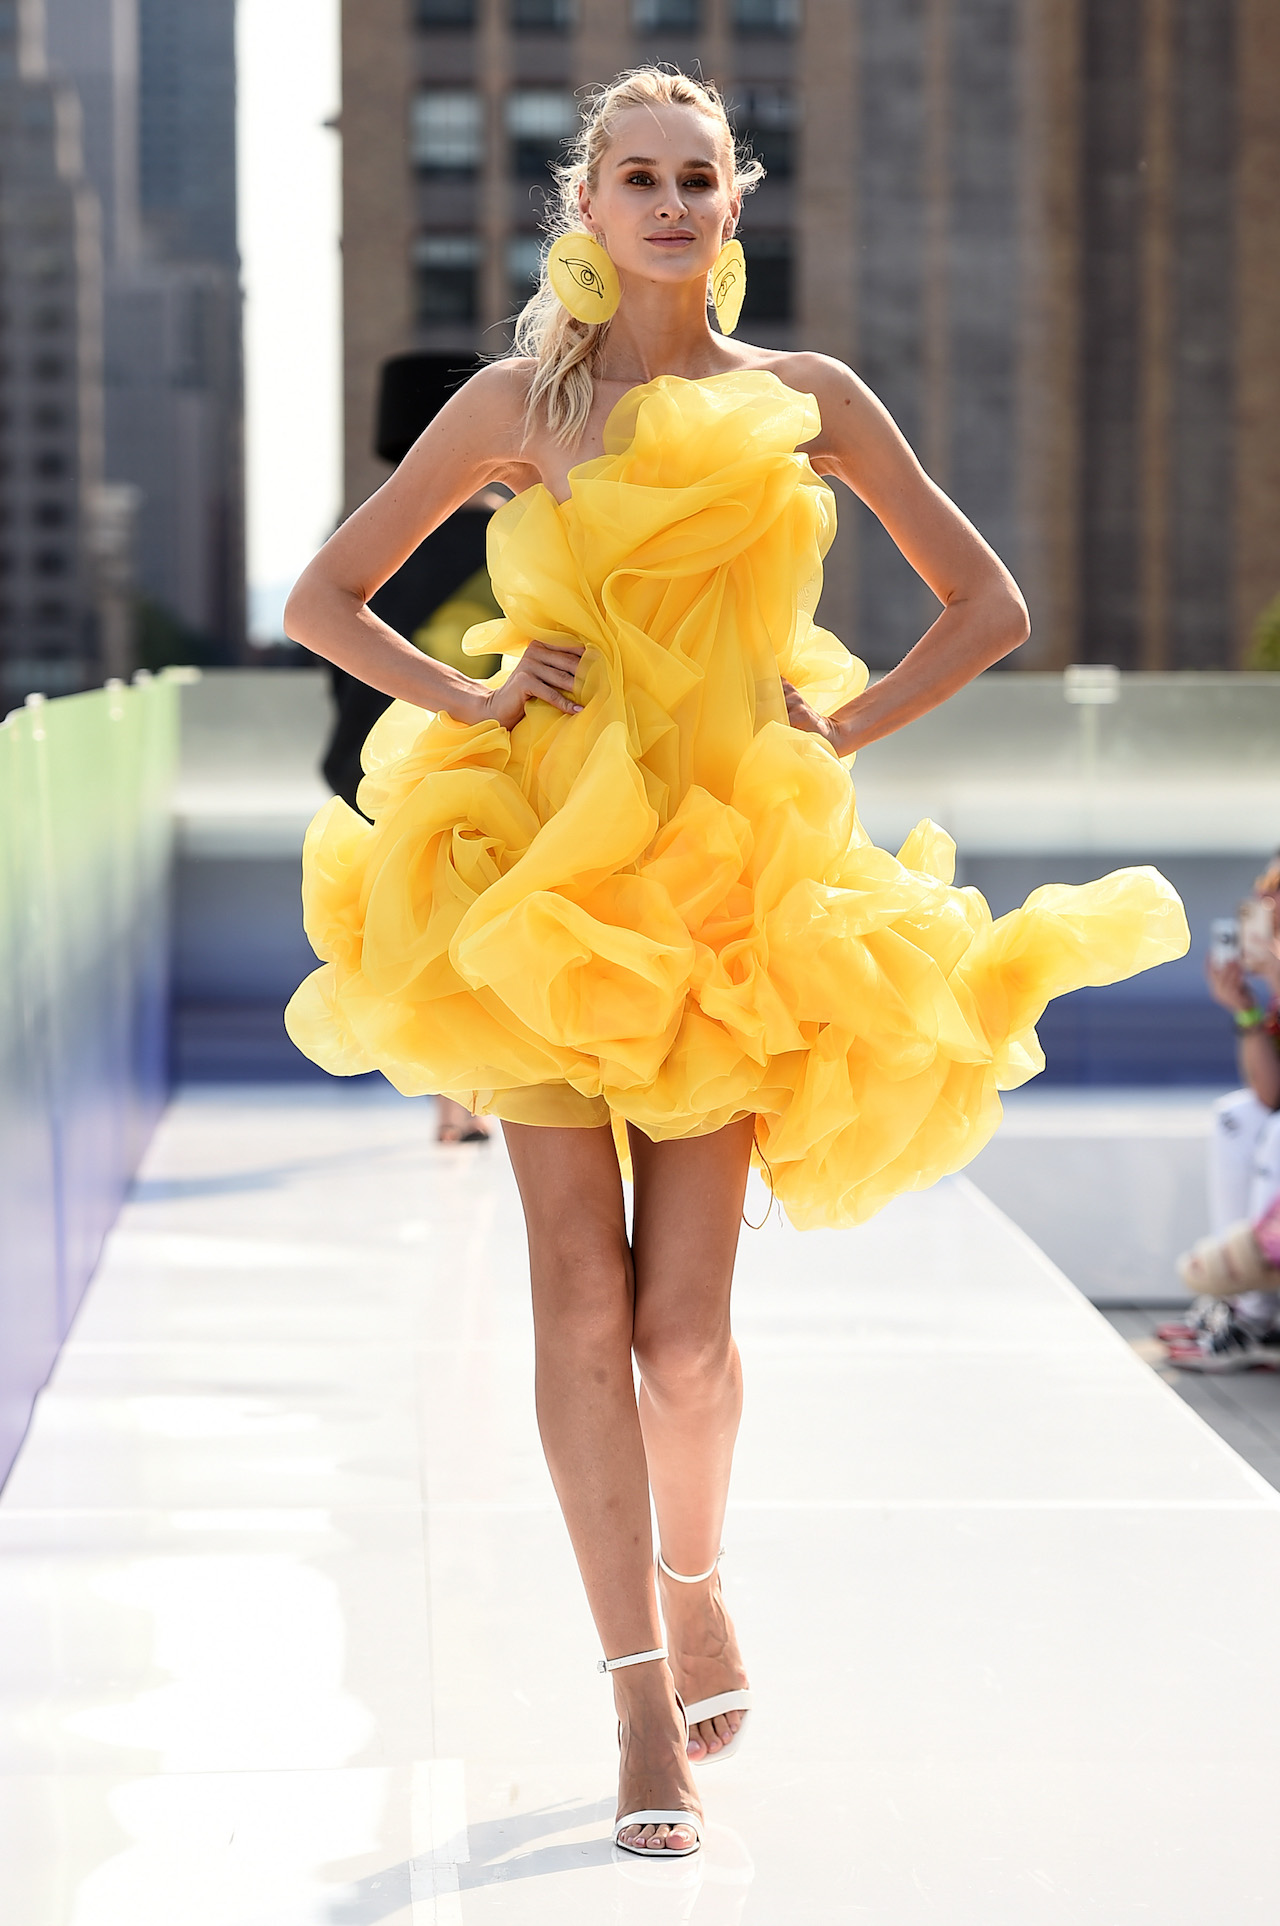 A model stands on the runway at New York Fashion Week in a yellow dress designed by FIDM Grad Kyle Denman